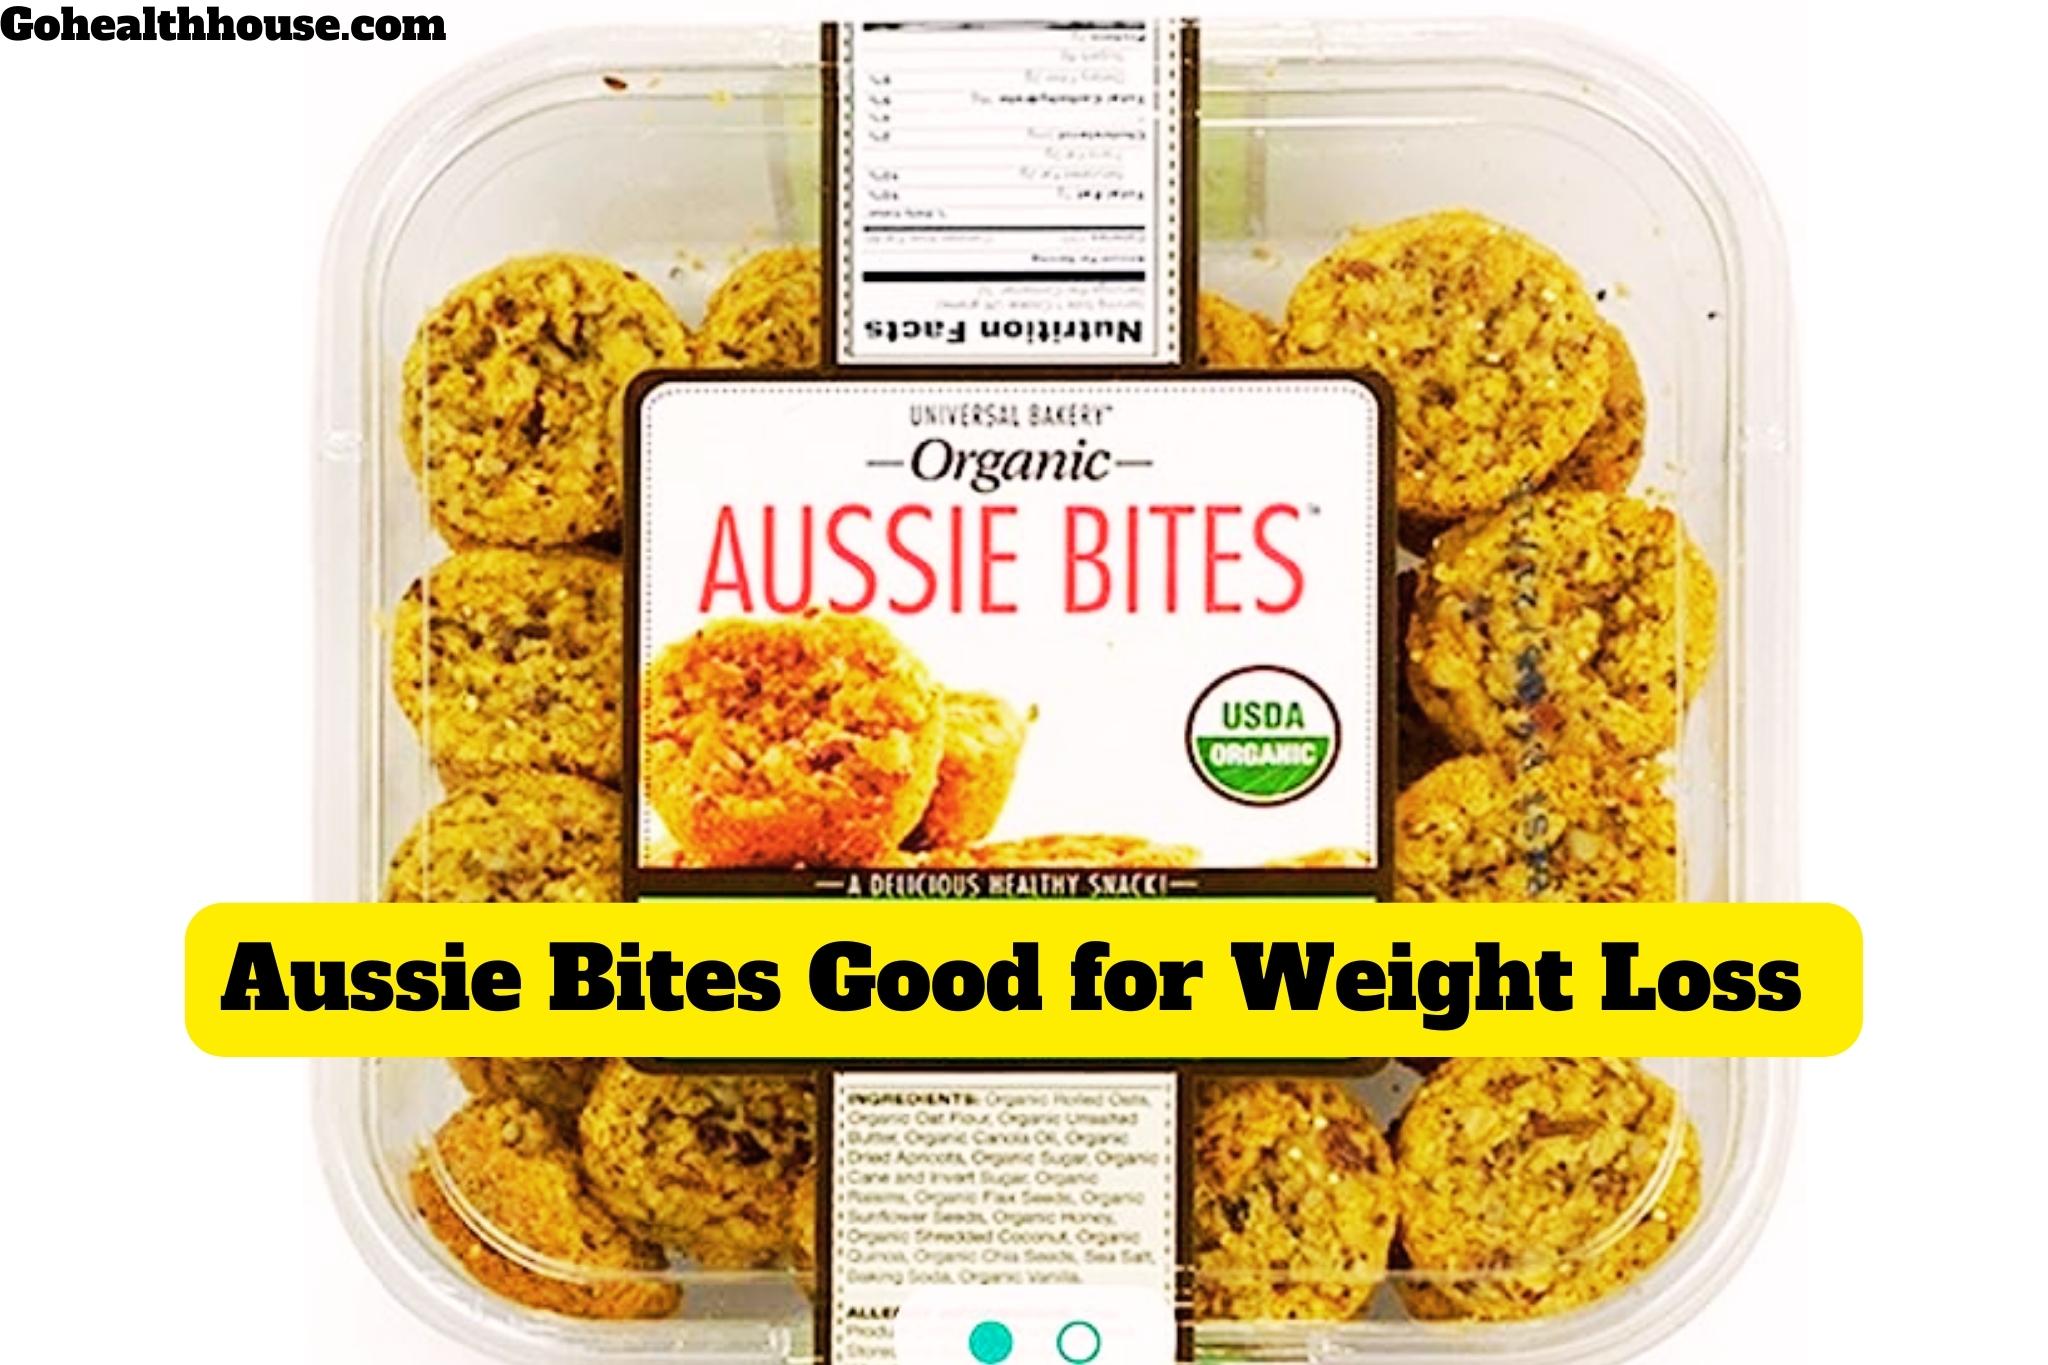 Are Aussie Bites Good for Weight Loss